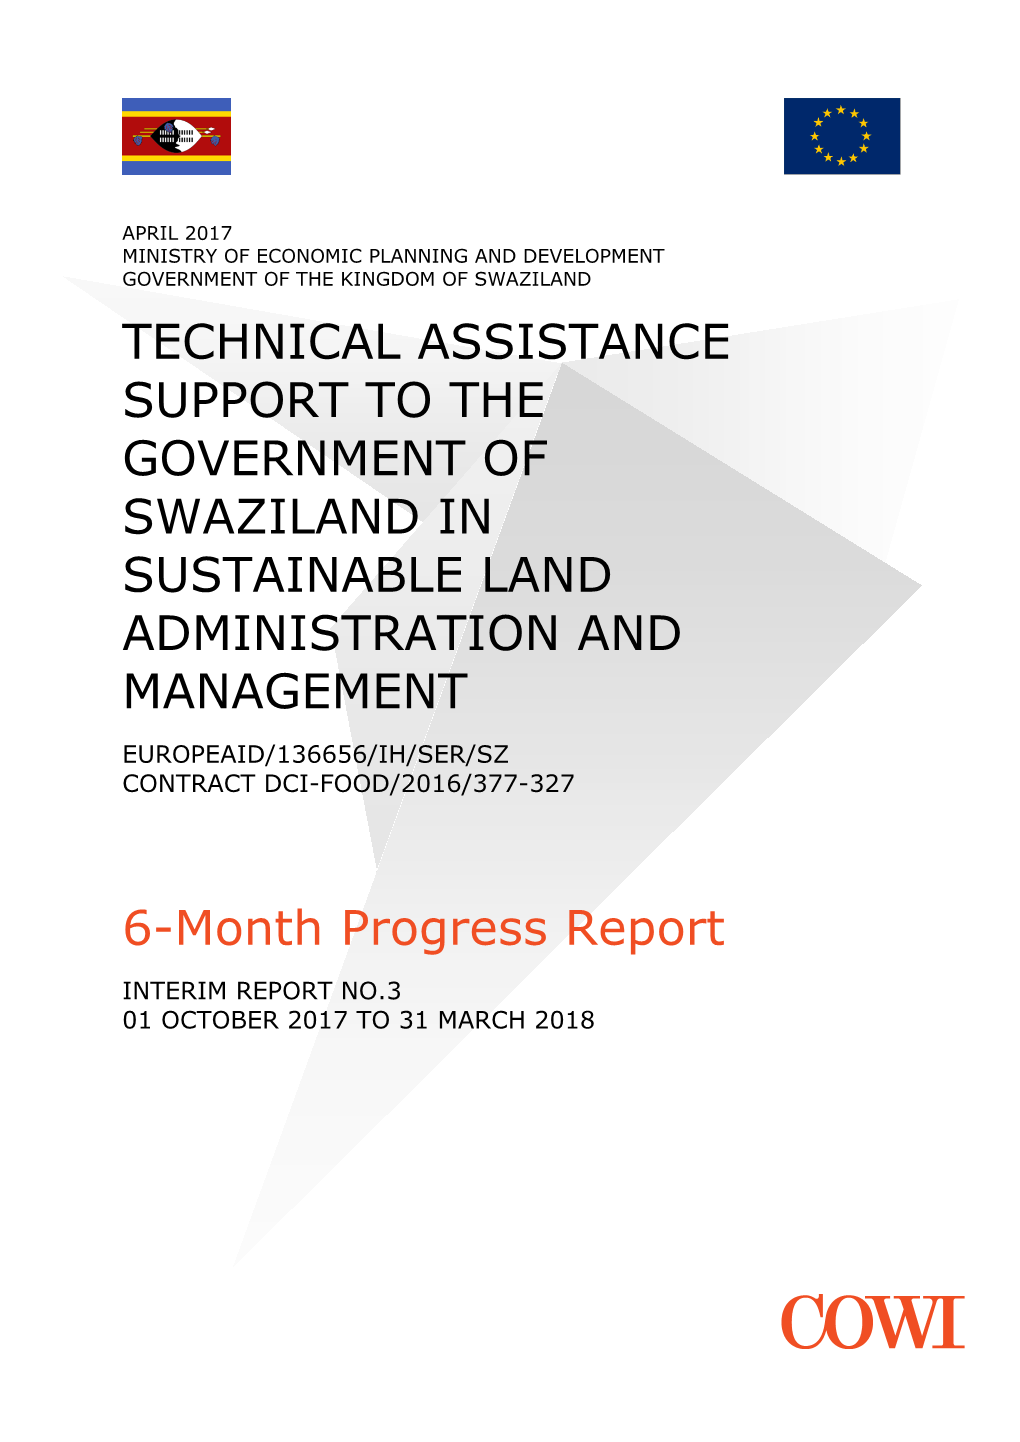 Technical Assistance Support to the Government of Swaziland in Sustainable Land Administration and Management